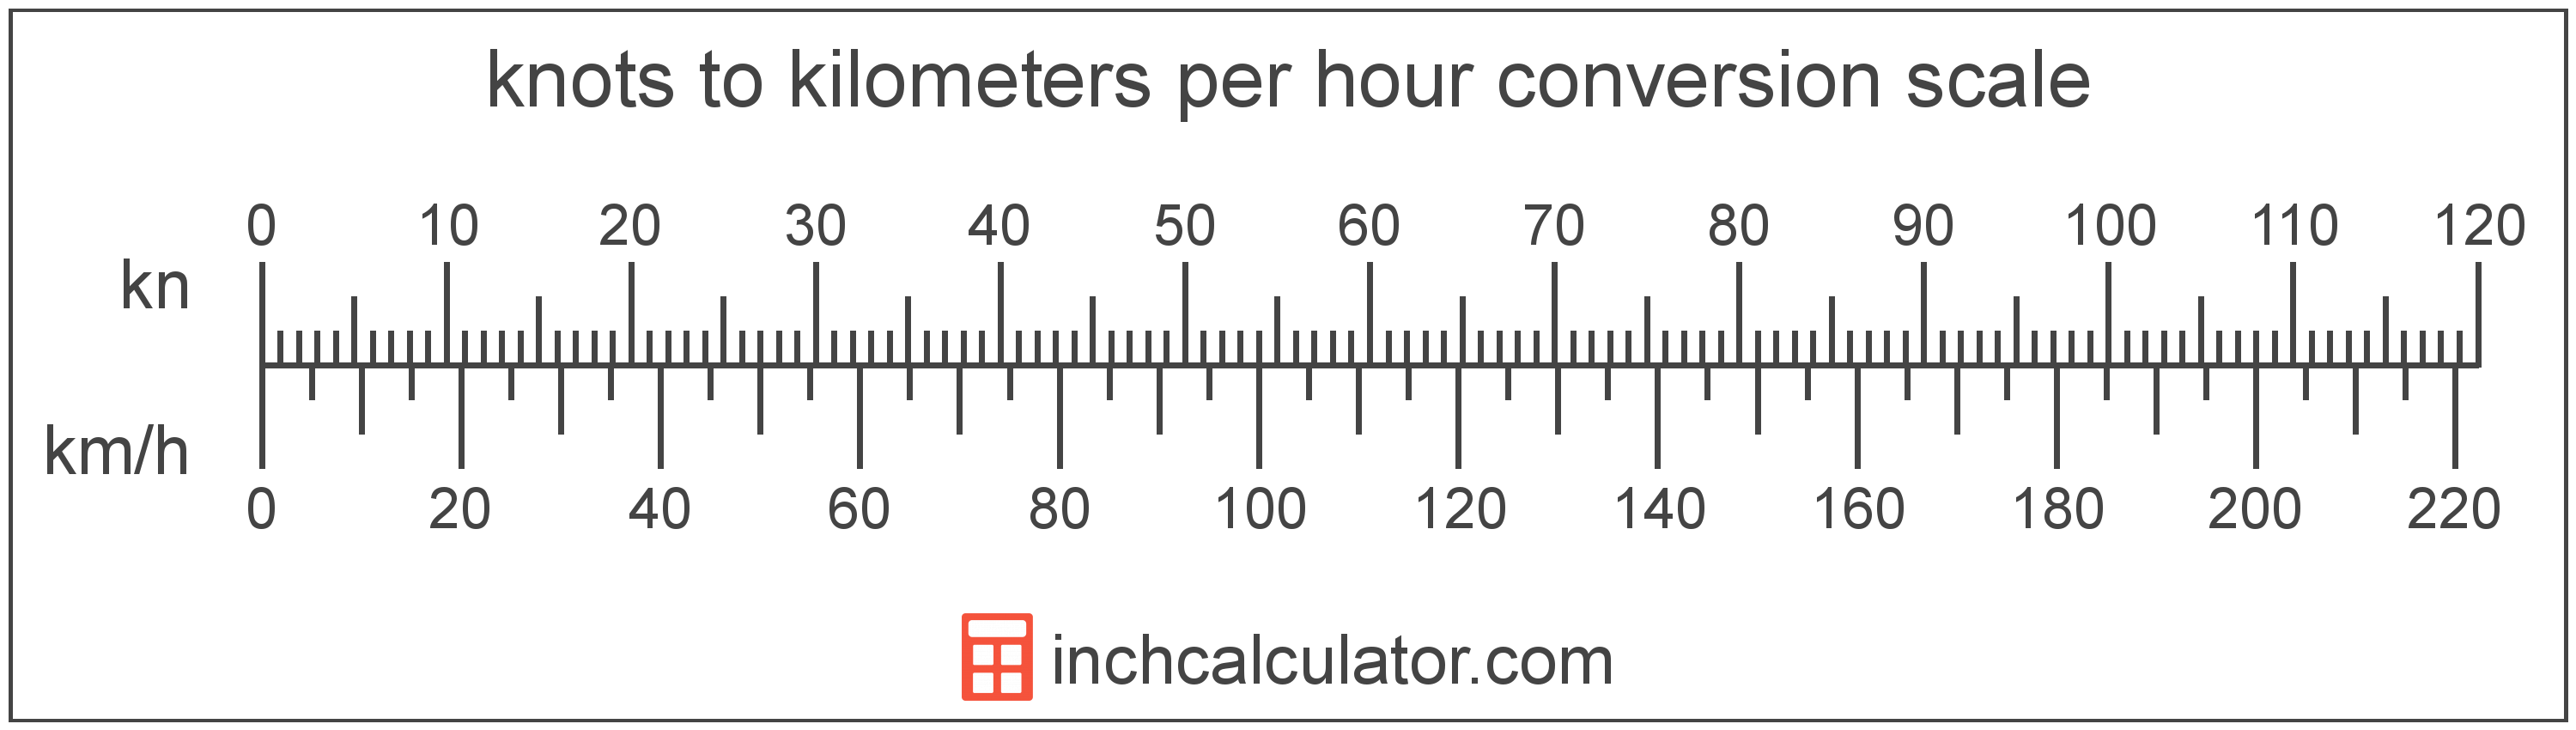 conversion scale showing kilometers per hour and equivalent knots speed values